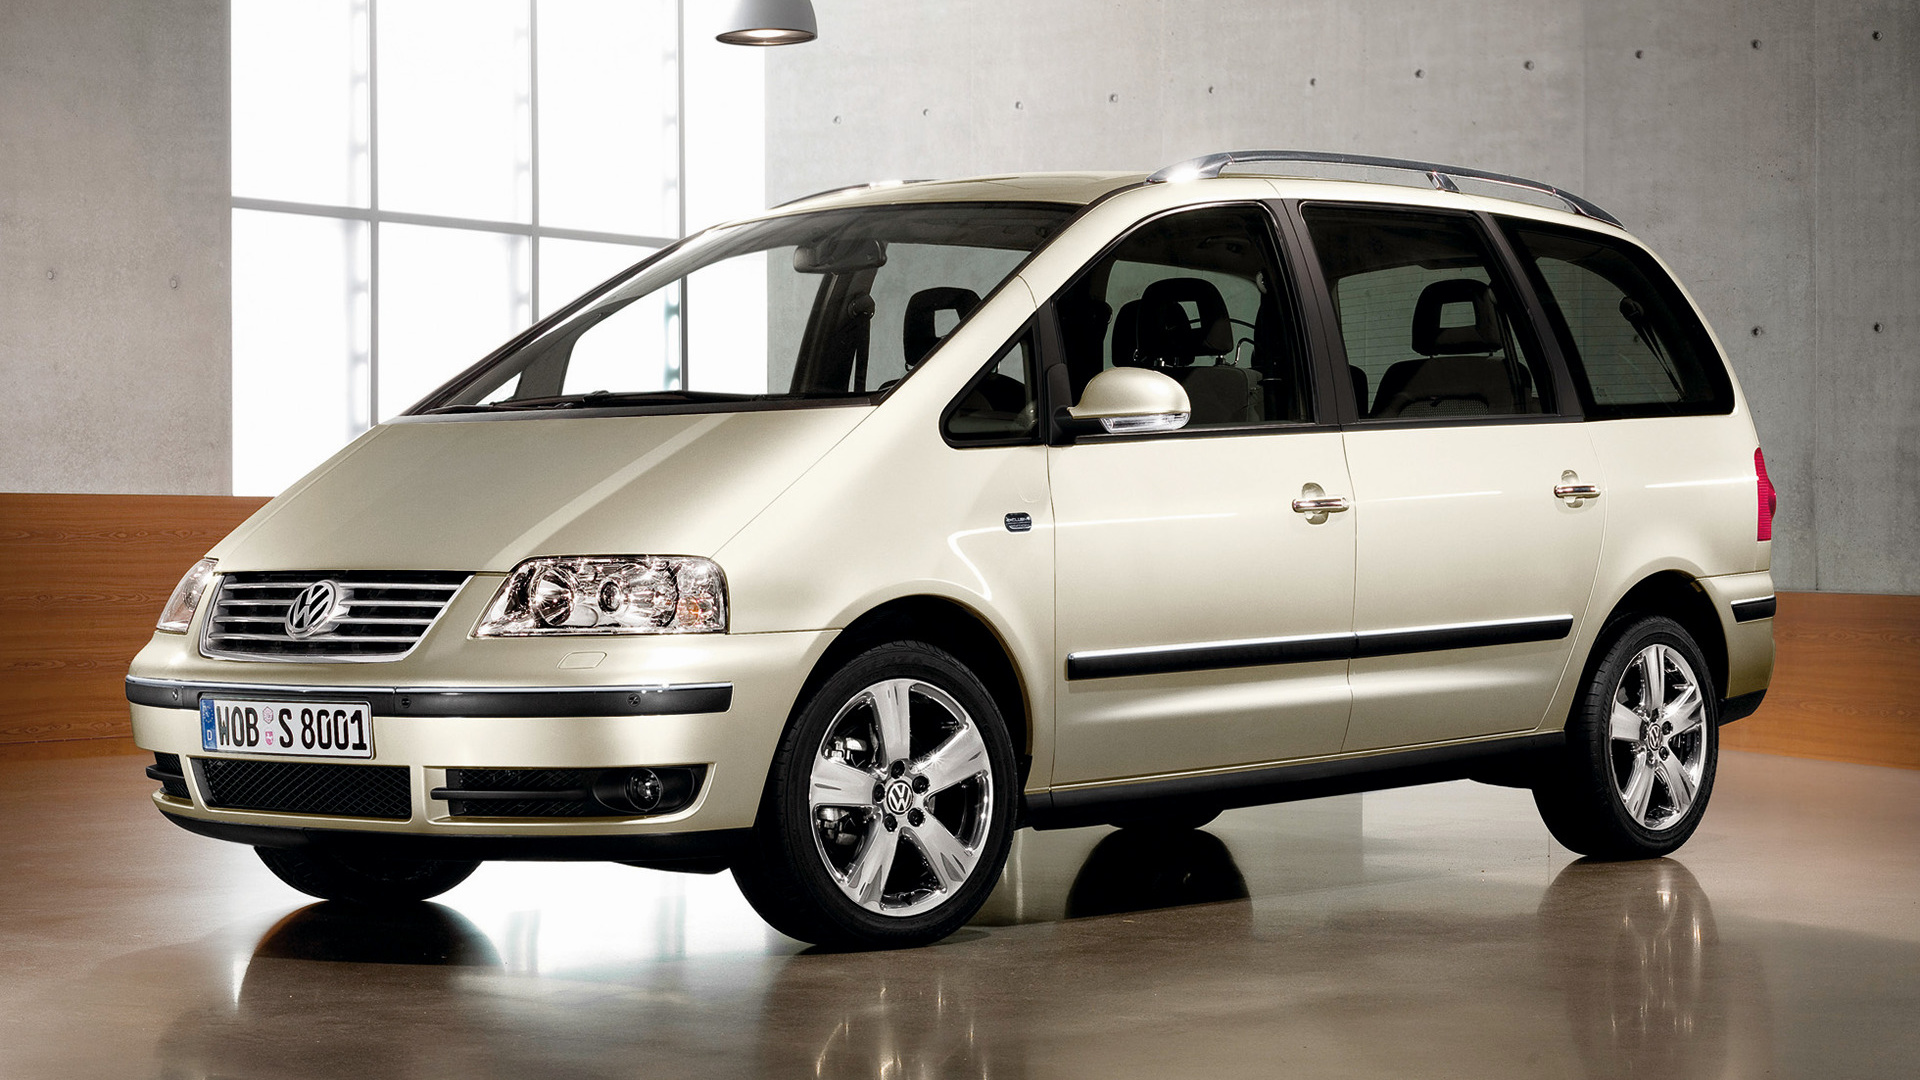 Volkswagen Sharan Exclusive Edition and HD Image